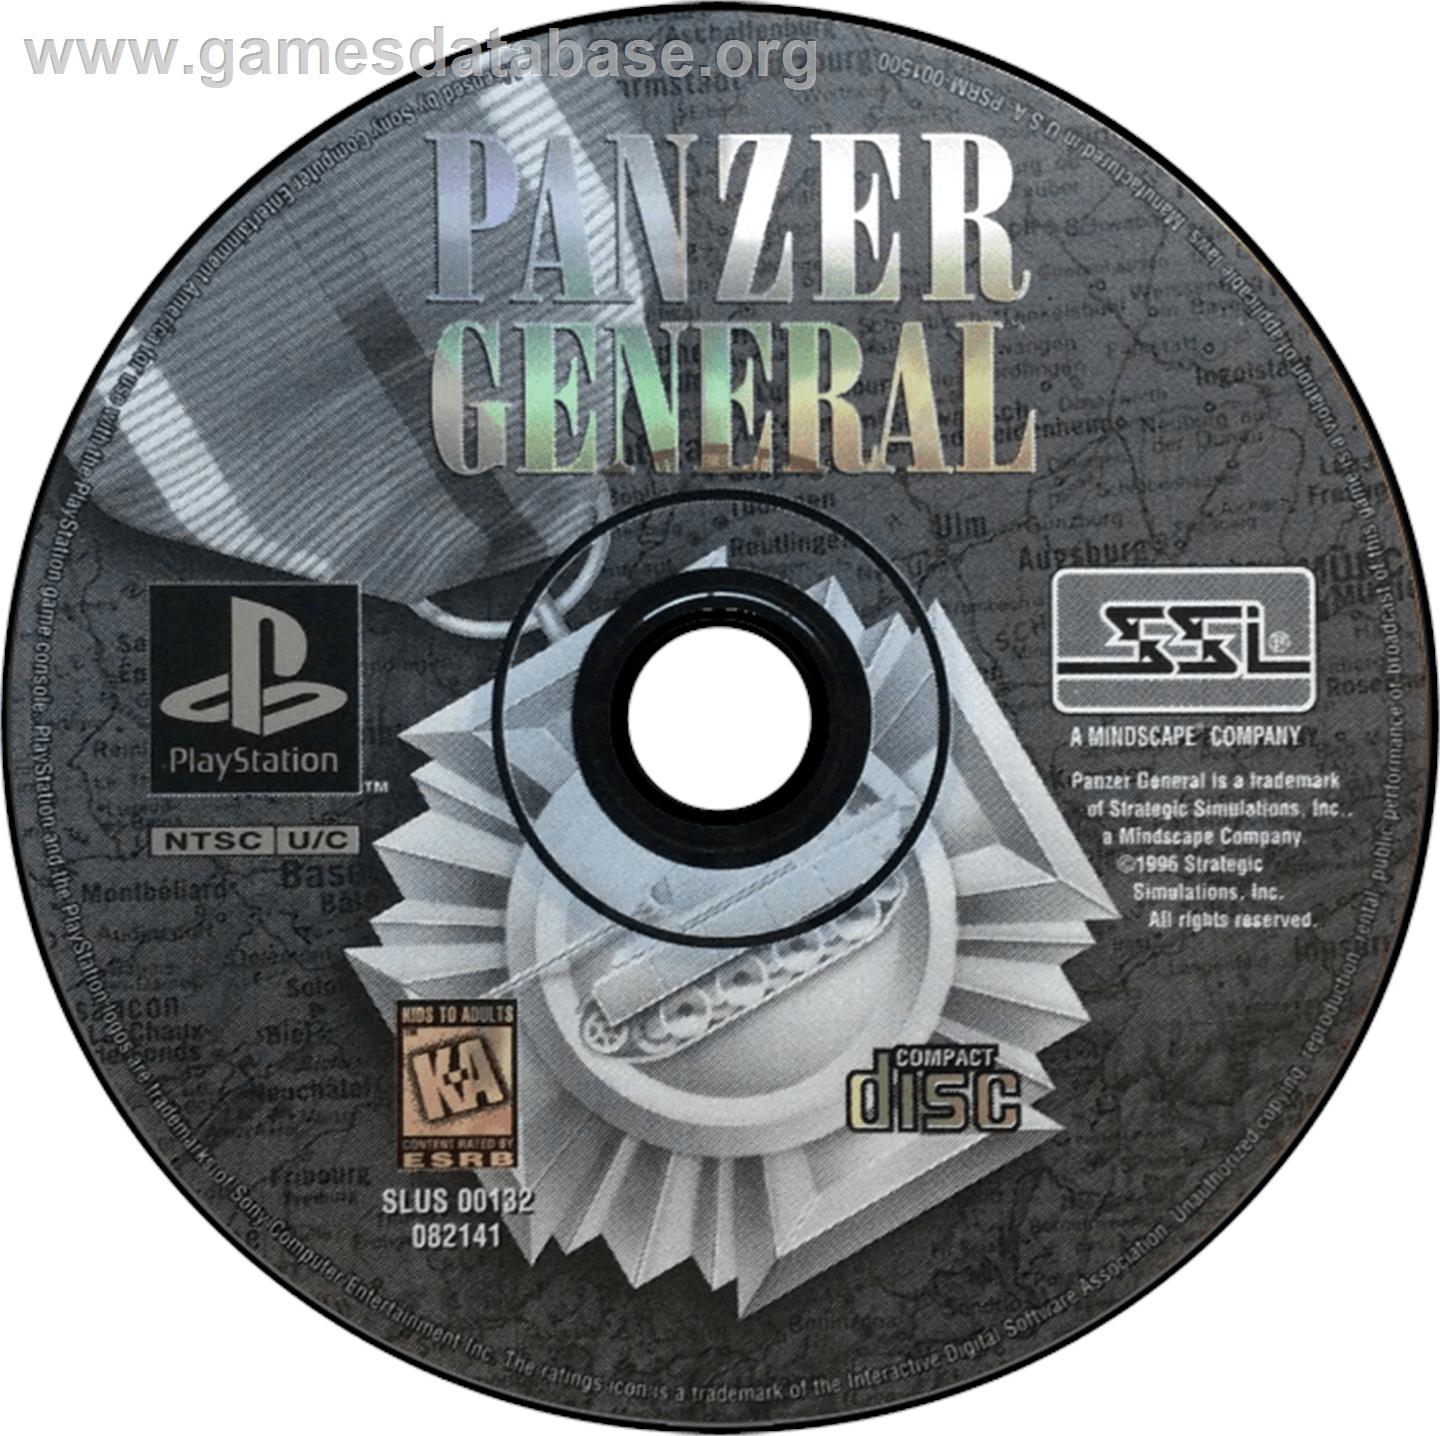 Panzer General - Sony Playstation - Artwork - Disc